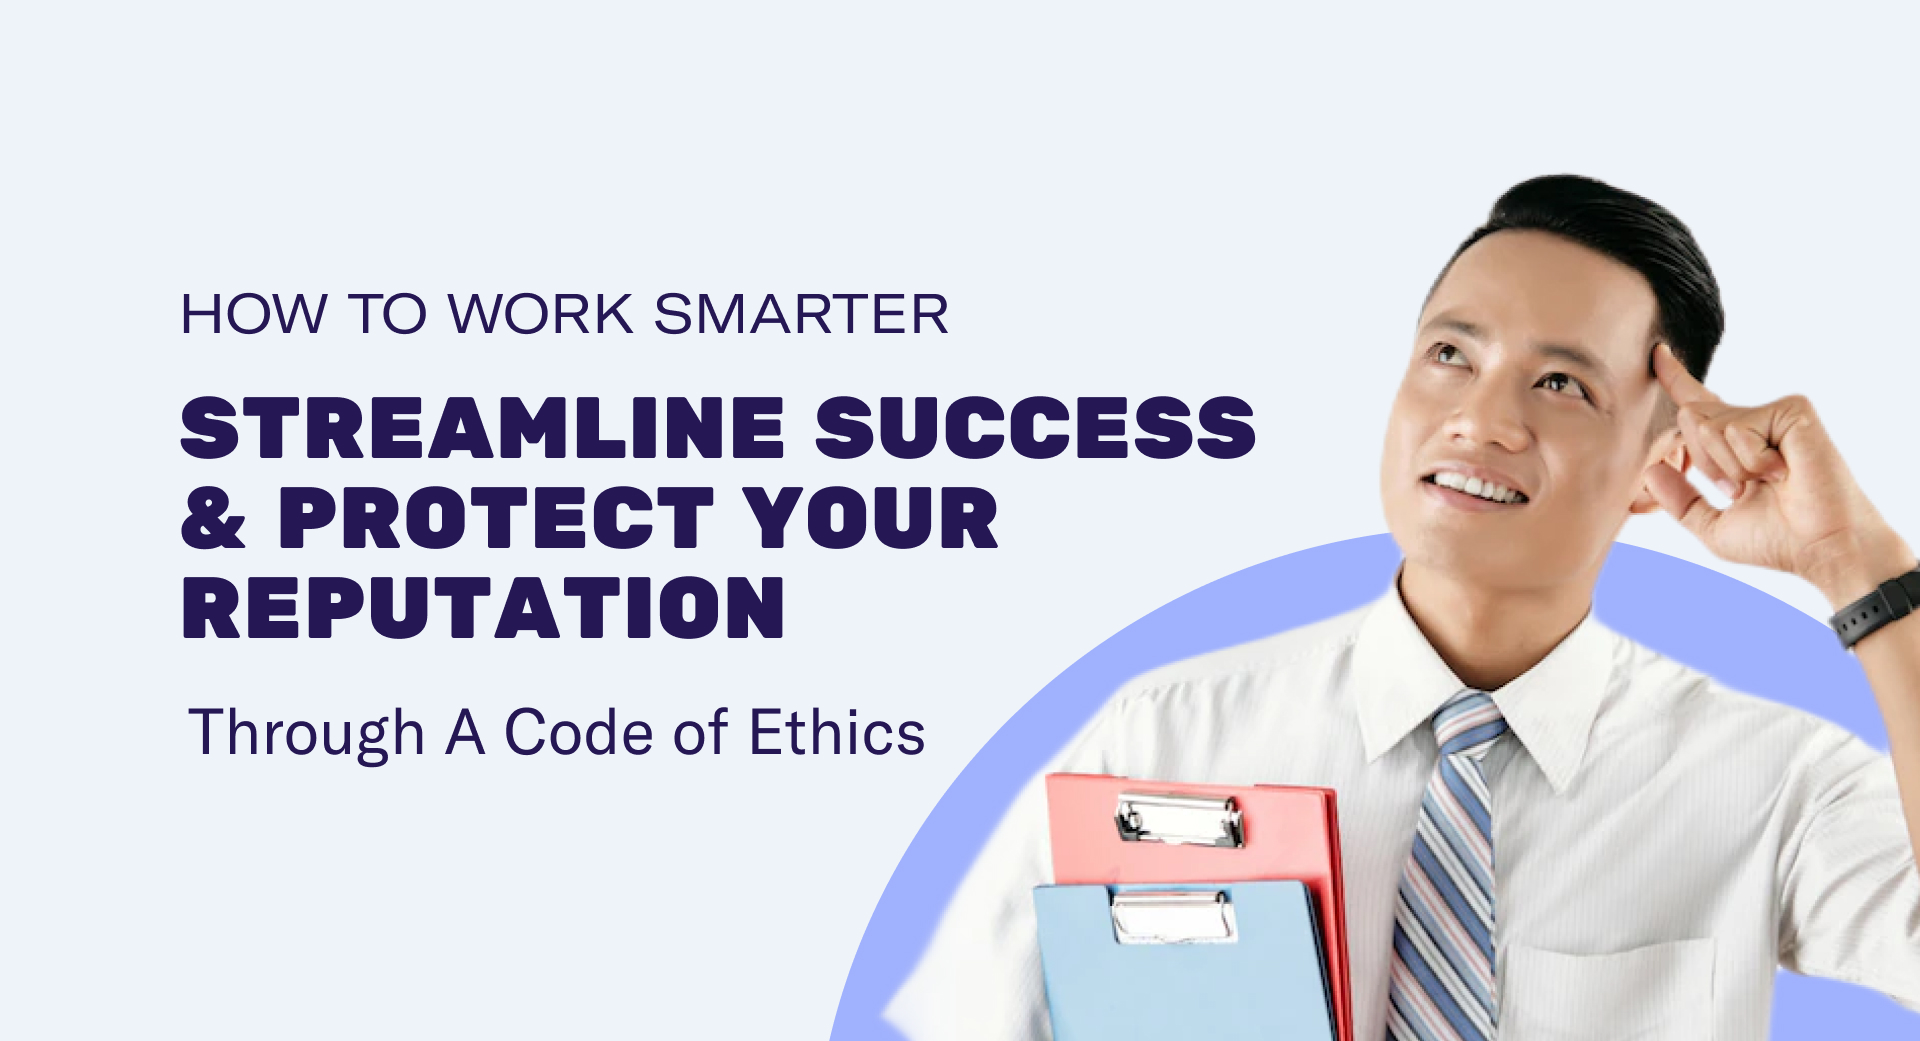 How to Work Smarter Streamline Success and Protect Your Reputation Through A Code of Ethics